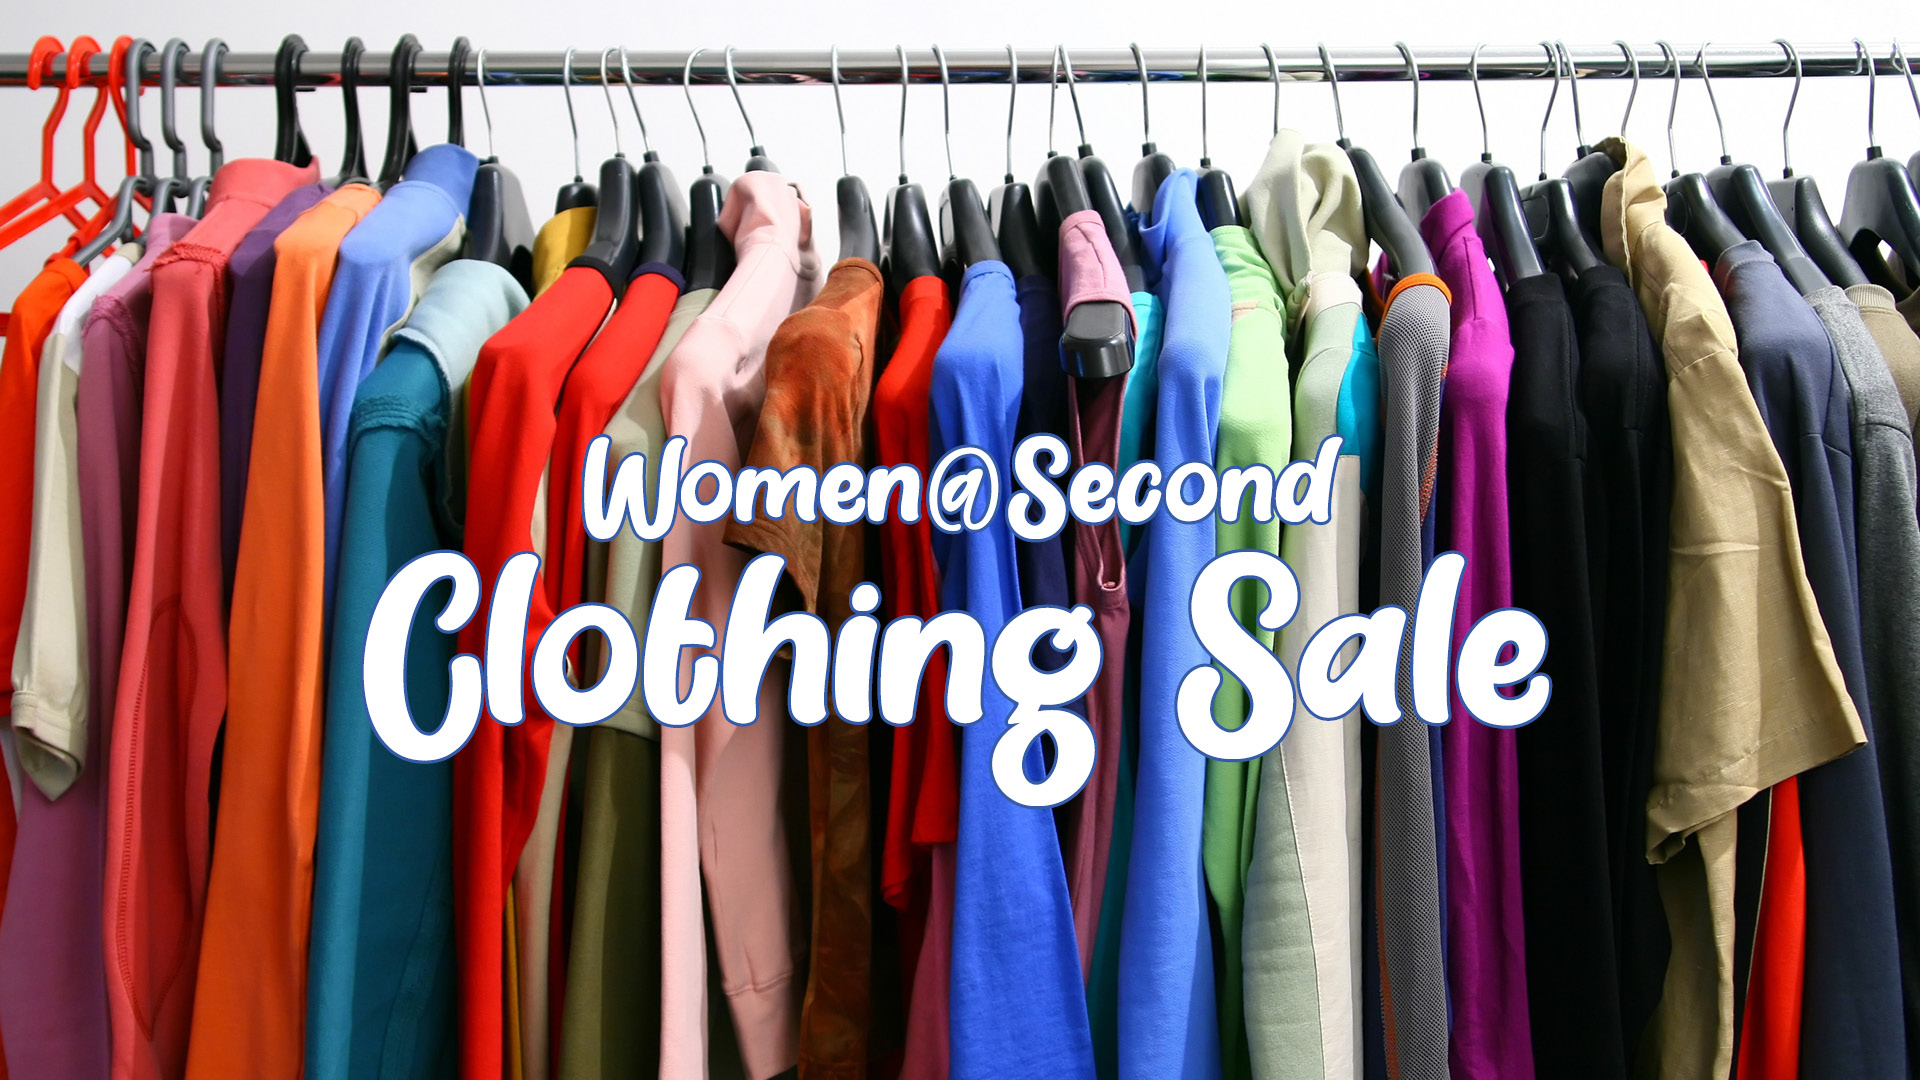 Women's Clothing on Sale